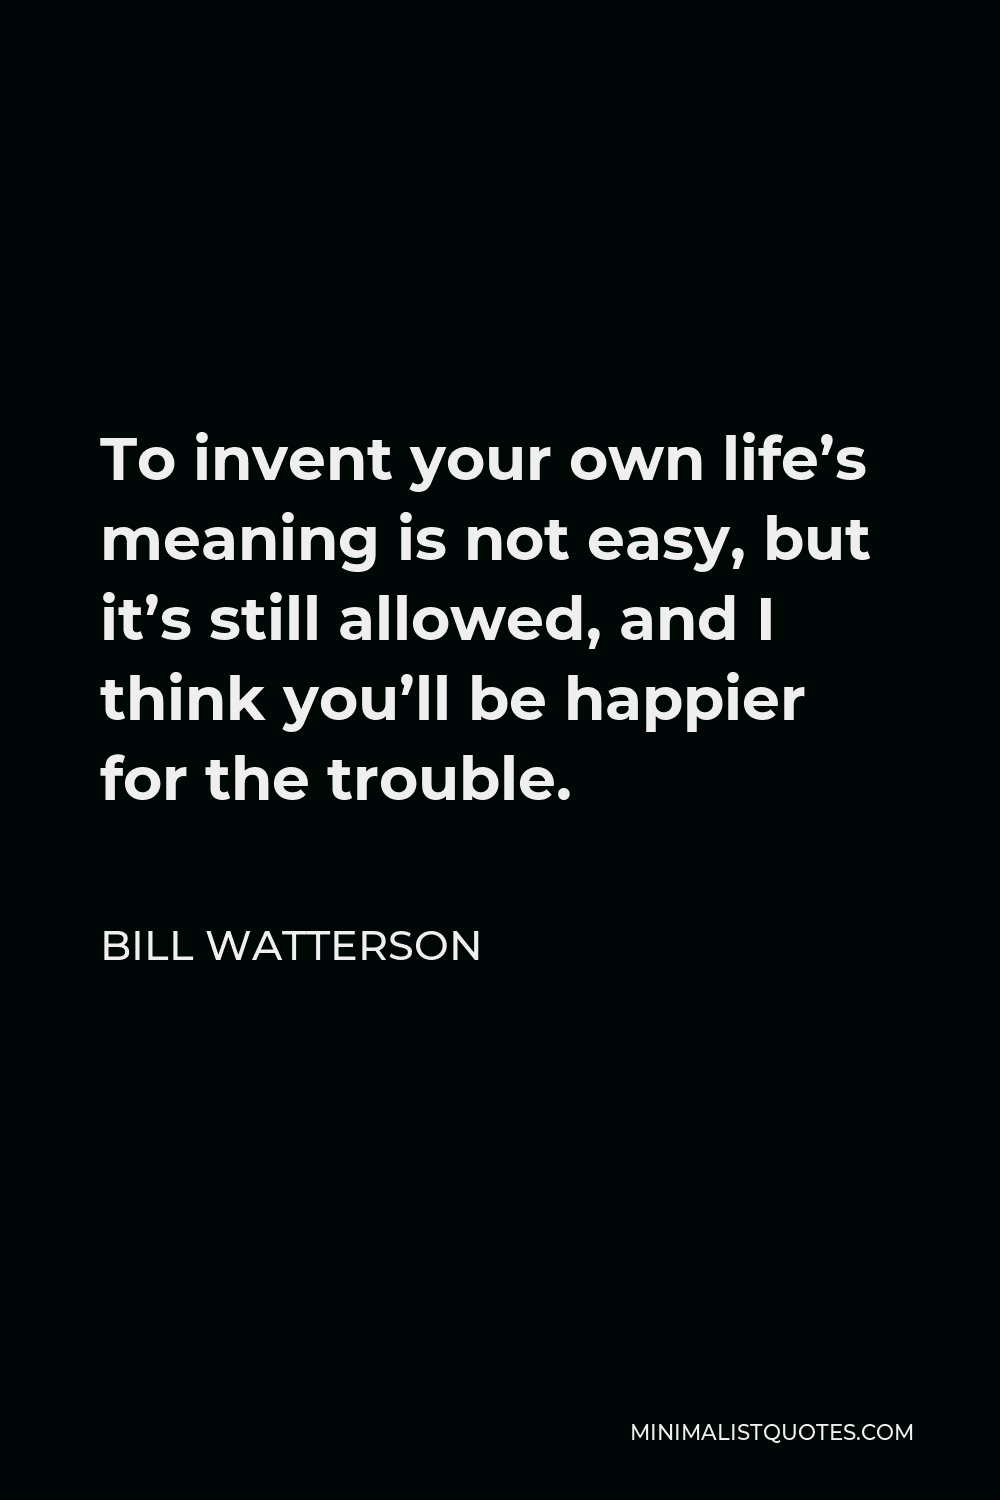 Bill Watterson Quote - To invent your own life’s meaning is not easy, but it’s still allowed, and I think you’ll be happier for the trouble.